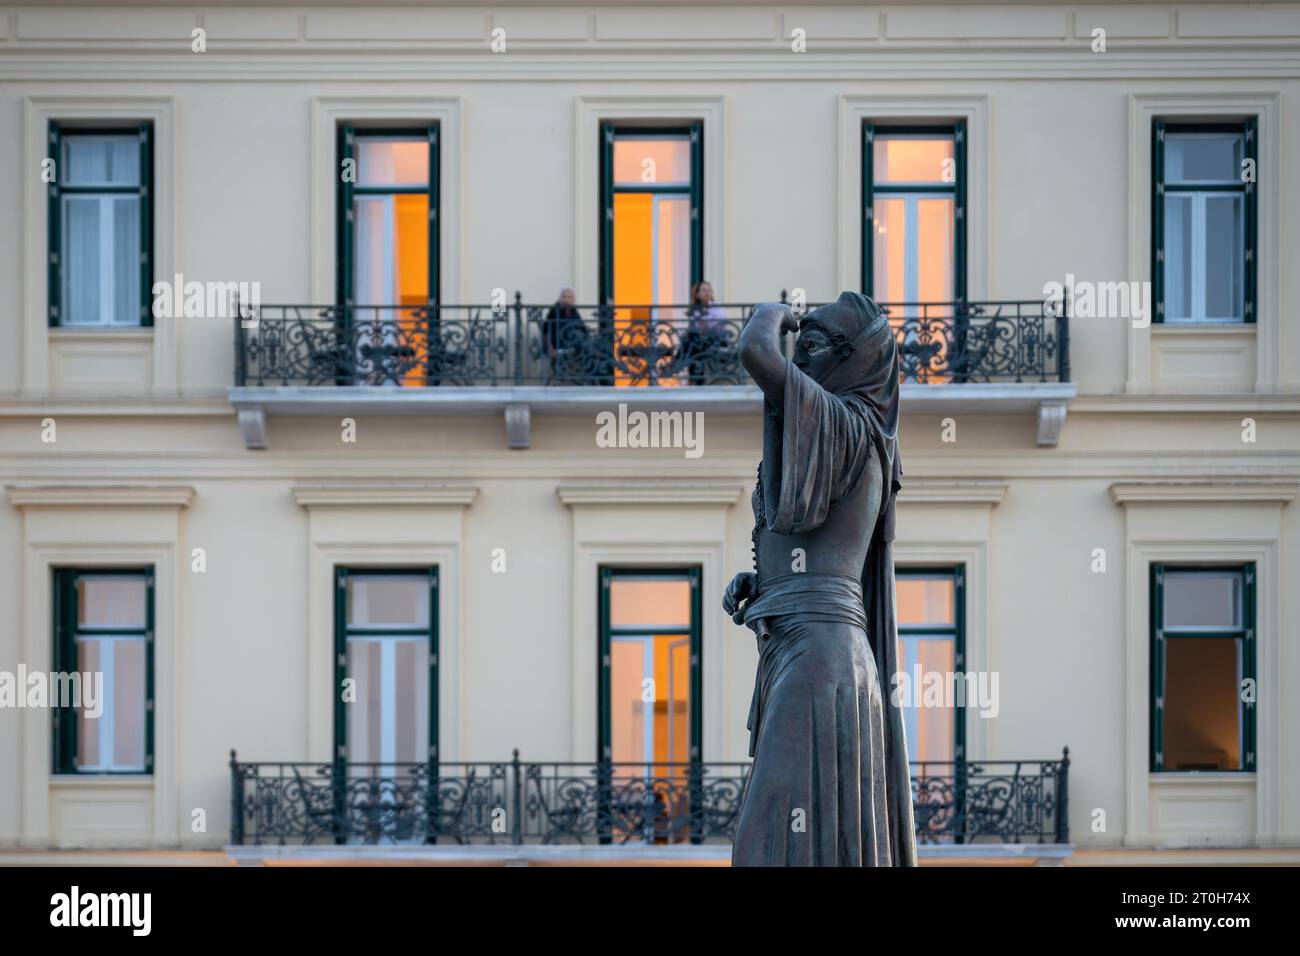 Statue of Laskarina Mpoumpoulina, a hero and military leader of Greek Independence War of 1821, a local figure of Spetses island, Greece. Stock Photo